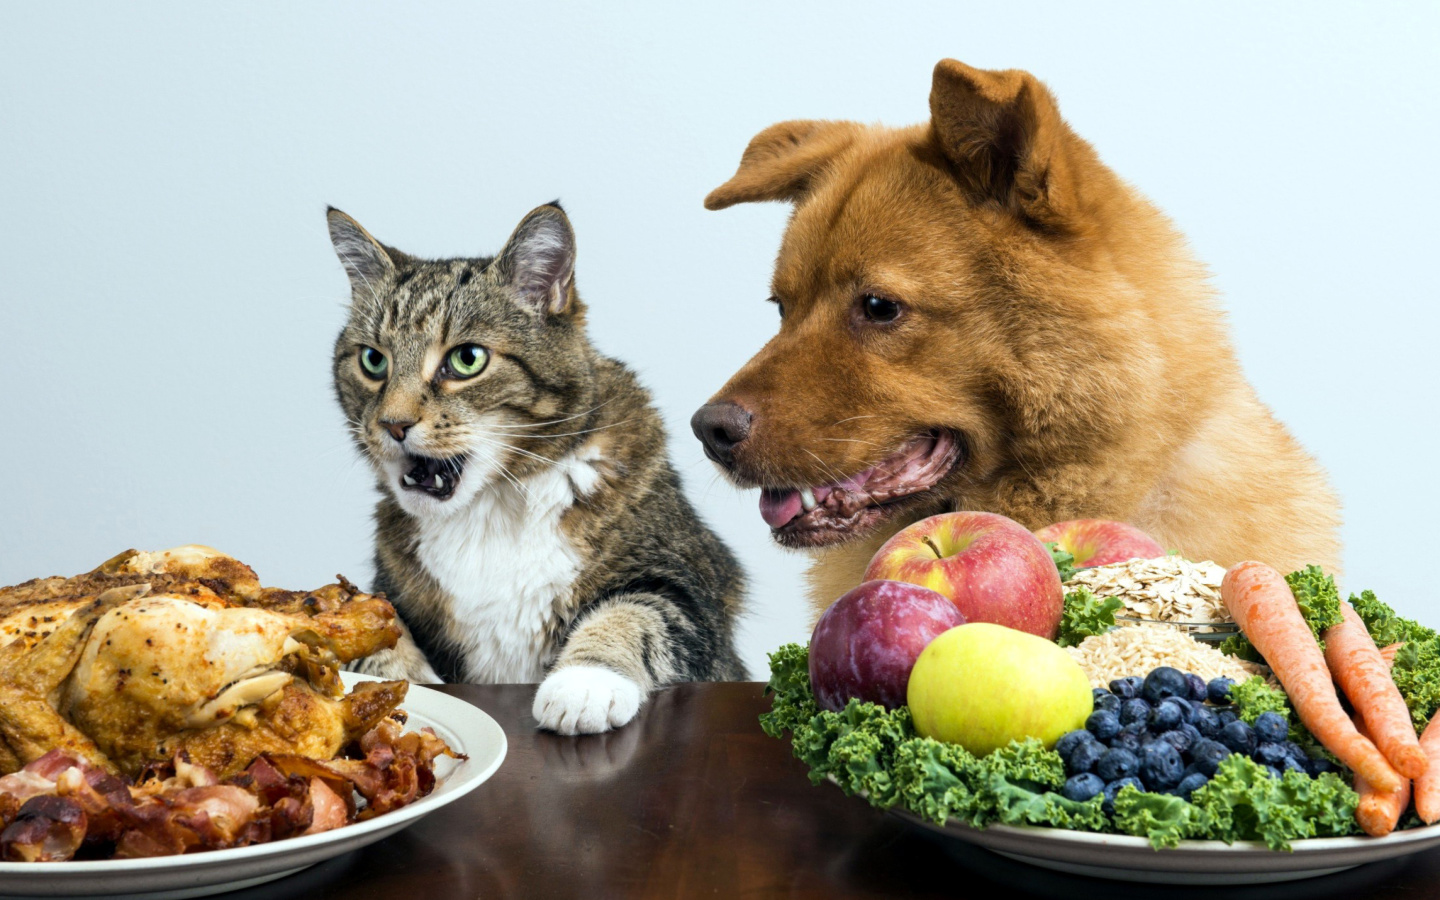 Dog and Cat Dinner wallpaper 1440x900